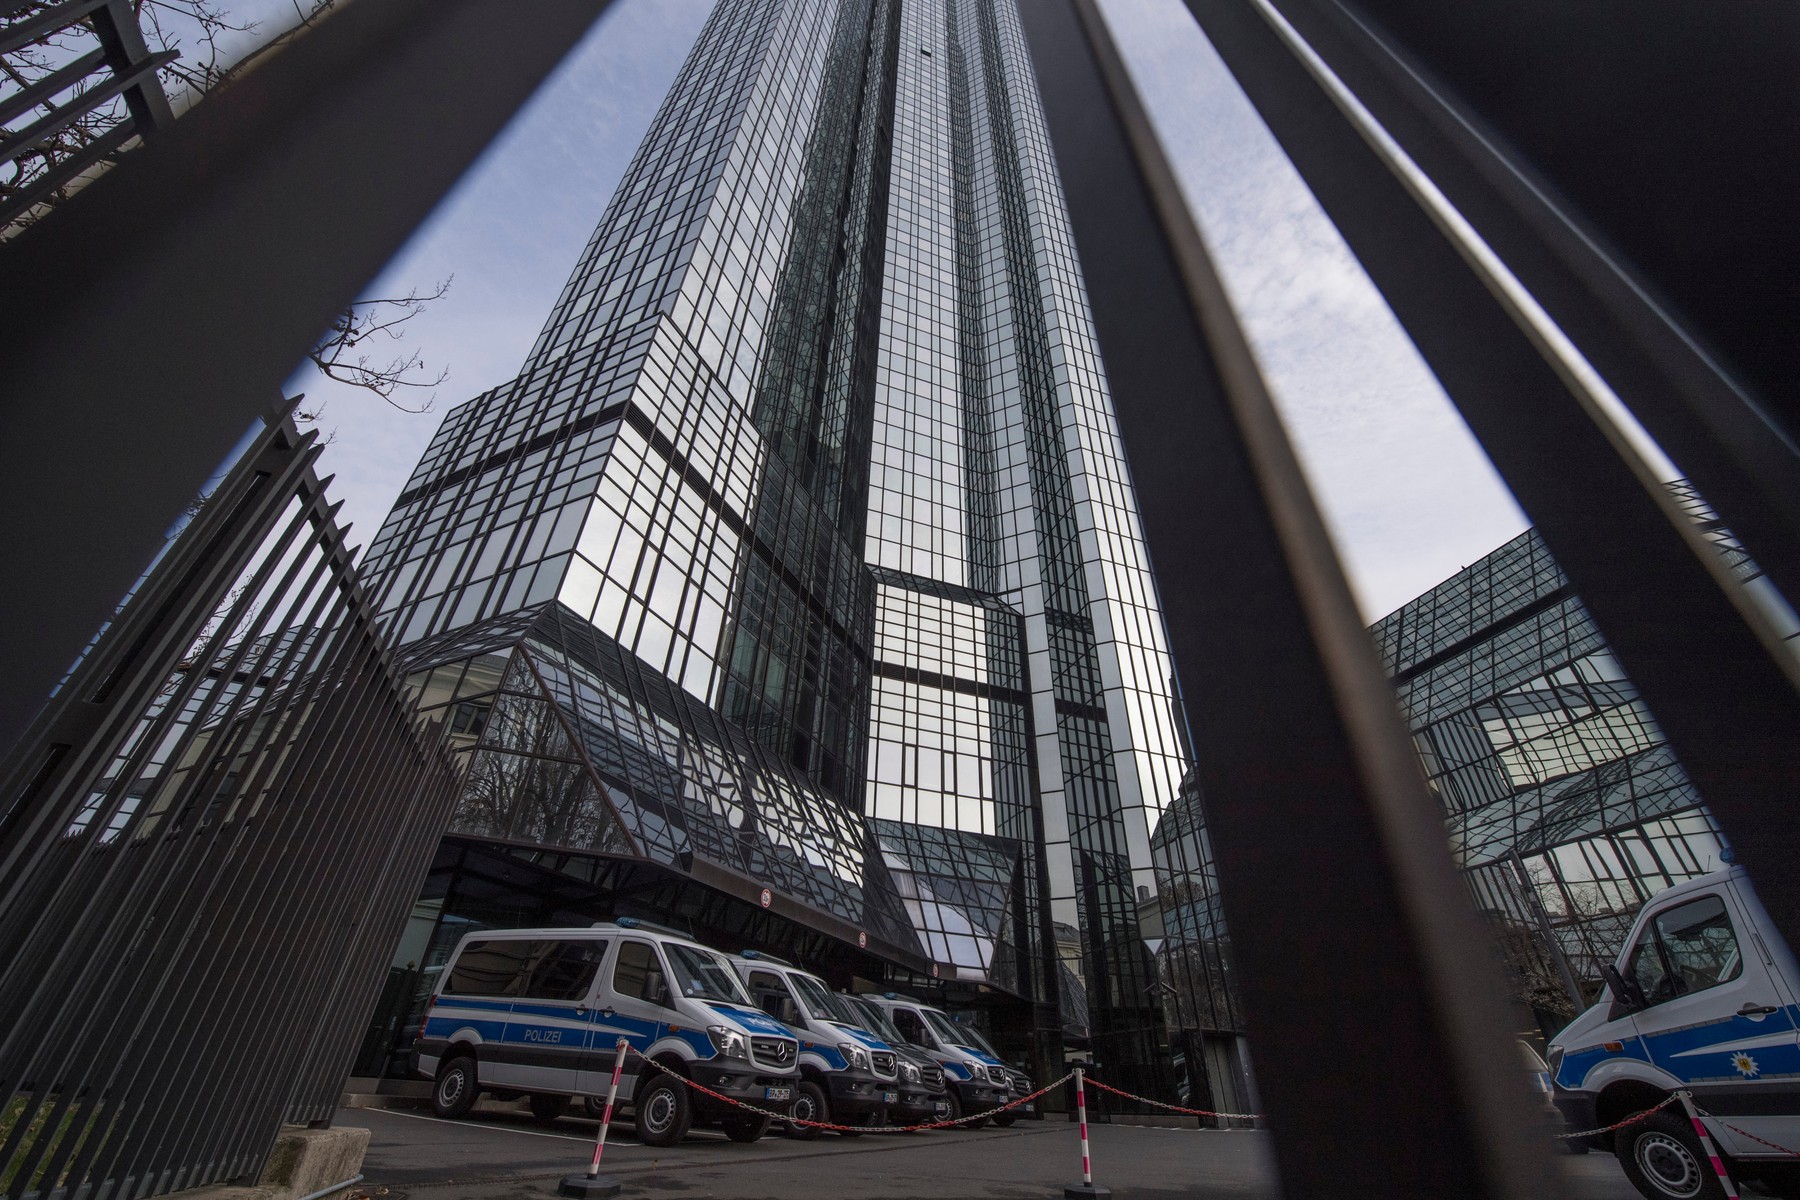 Police vehicles are parked at Deutsche Bank's headquarters in Frankfurt on November 29, 2018.  German prosecutors raided several Deutsche Bank offices in the Frankfurt area on November 29, 2018 over suspicions of money laundering based on revelations from the 2016 "Panama Papers" data leak.,Image: 399034769, License: Rights-managed, Restrictions: Germany OUT, Model Release: no, Credit line: Boris Roessler / AFP / Profimedia